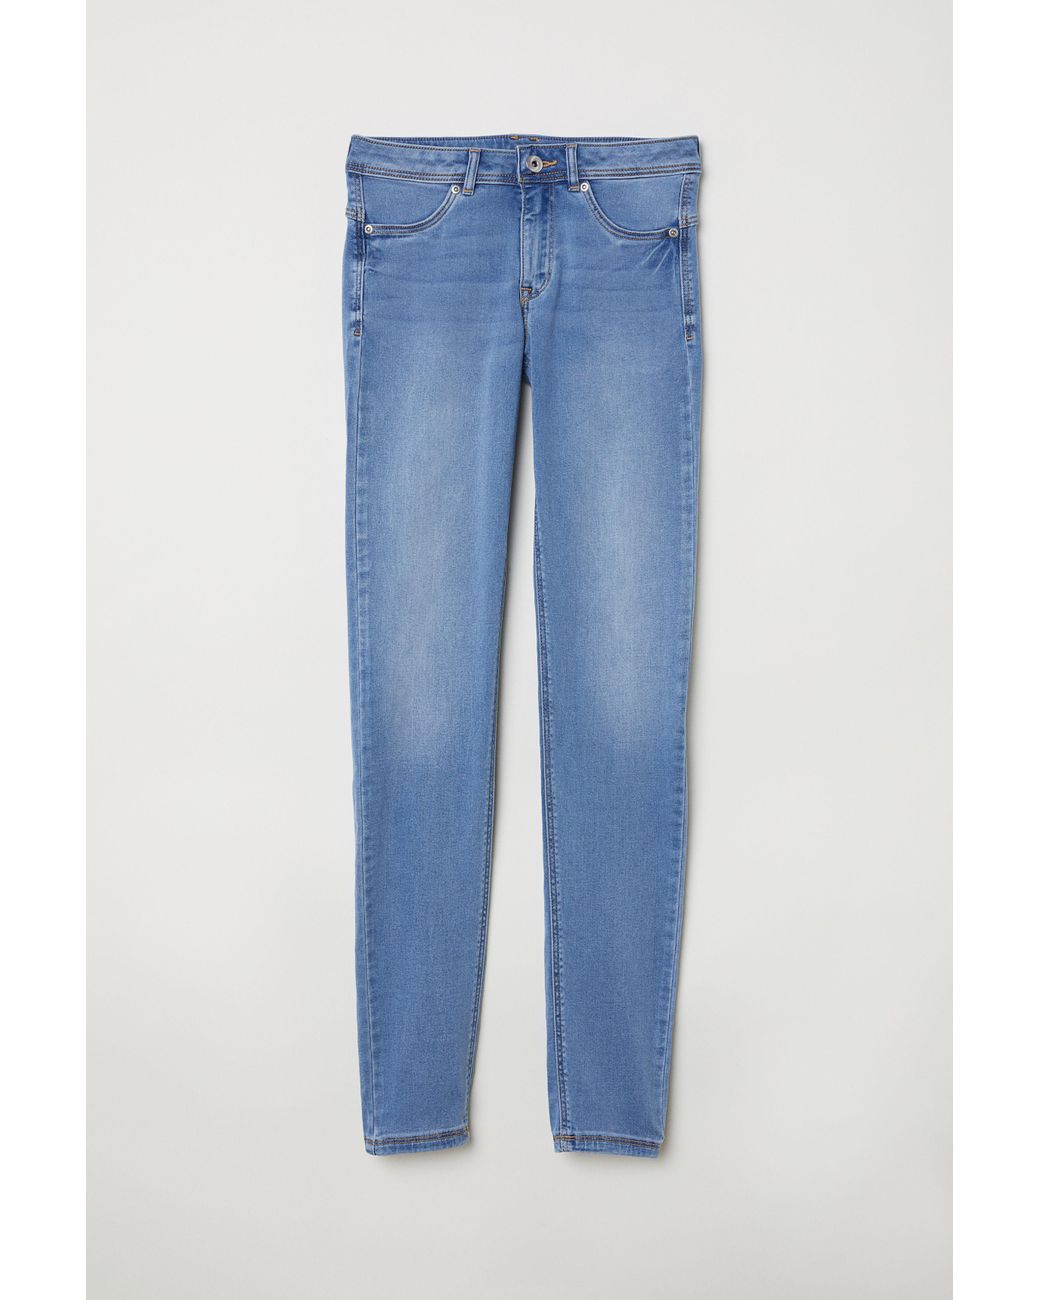 H&M Super Soft Low Jeggings in Blue | Lyst Canada